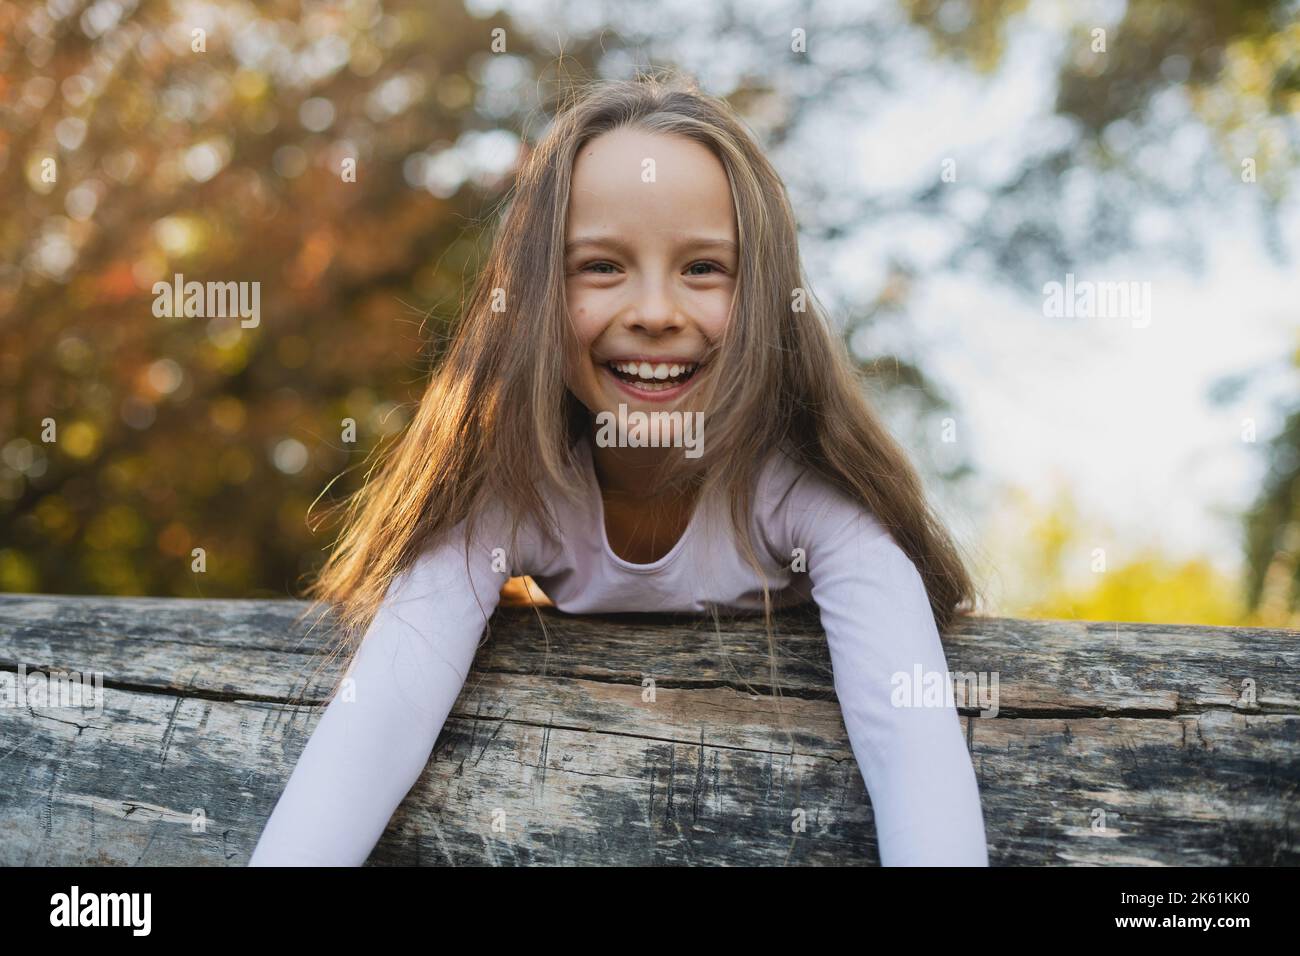 Kids and Sport. Side View of a Happy Little Girl Smiling at Camera